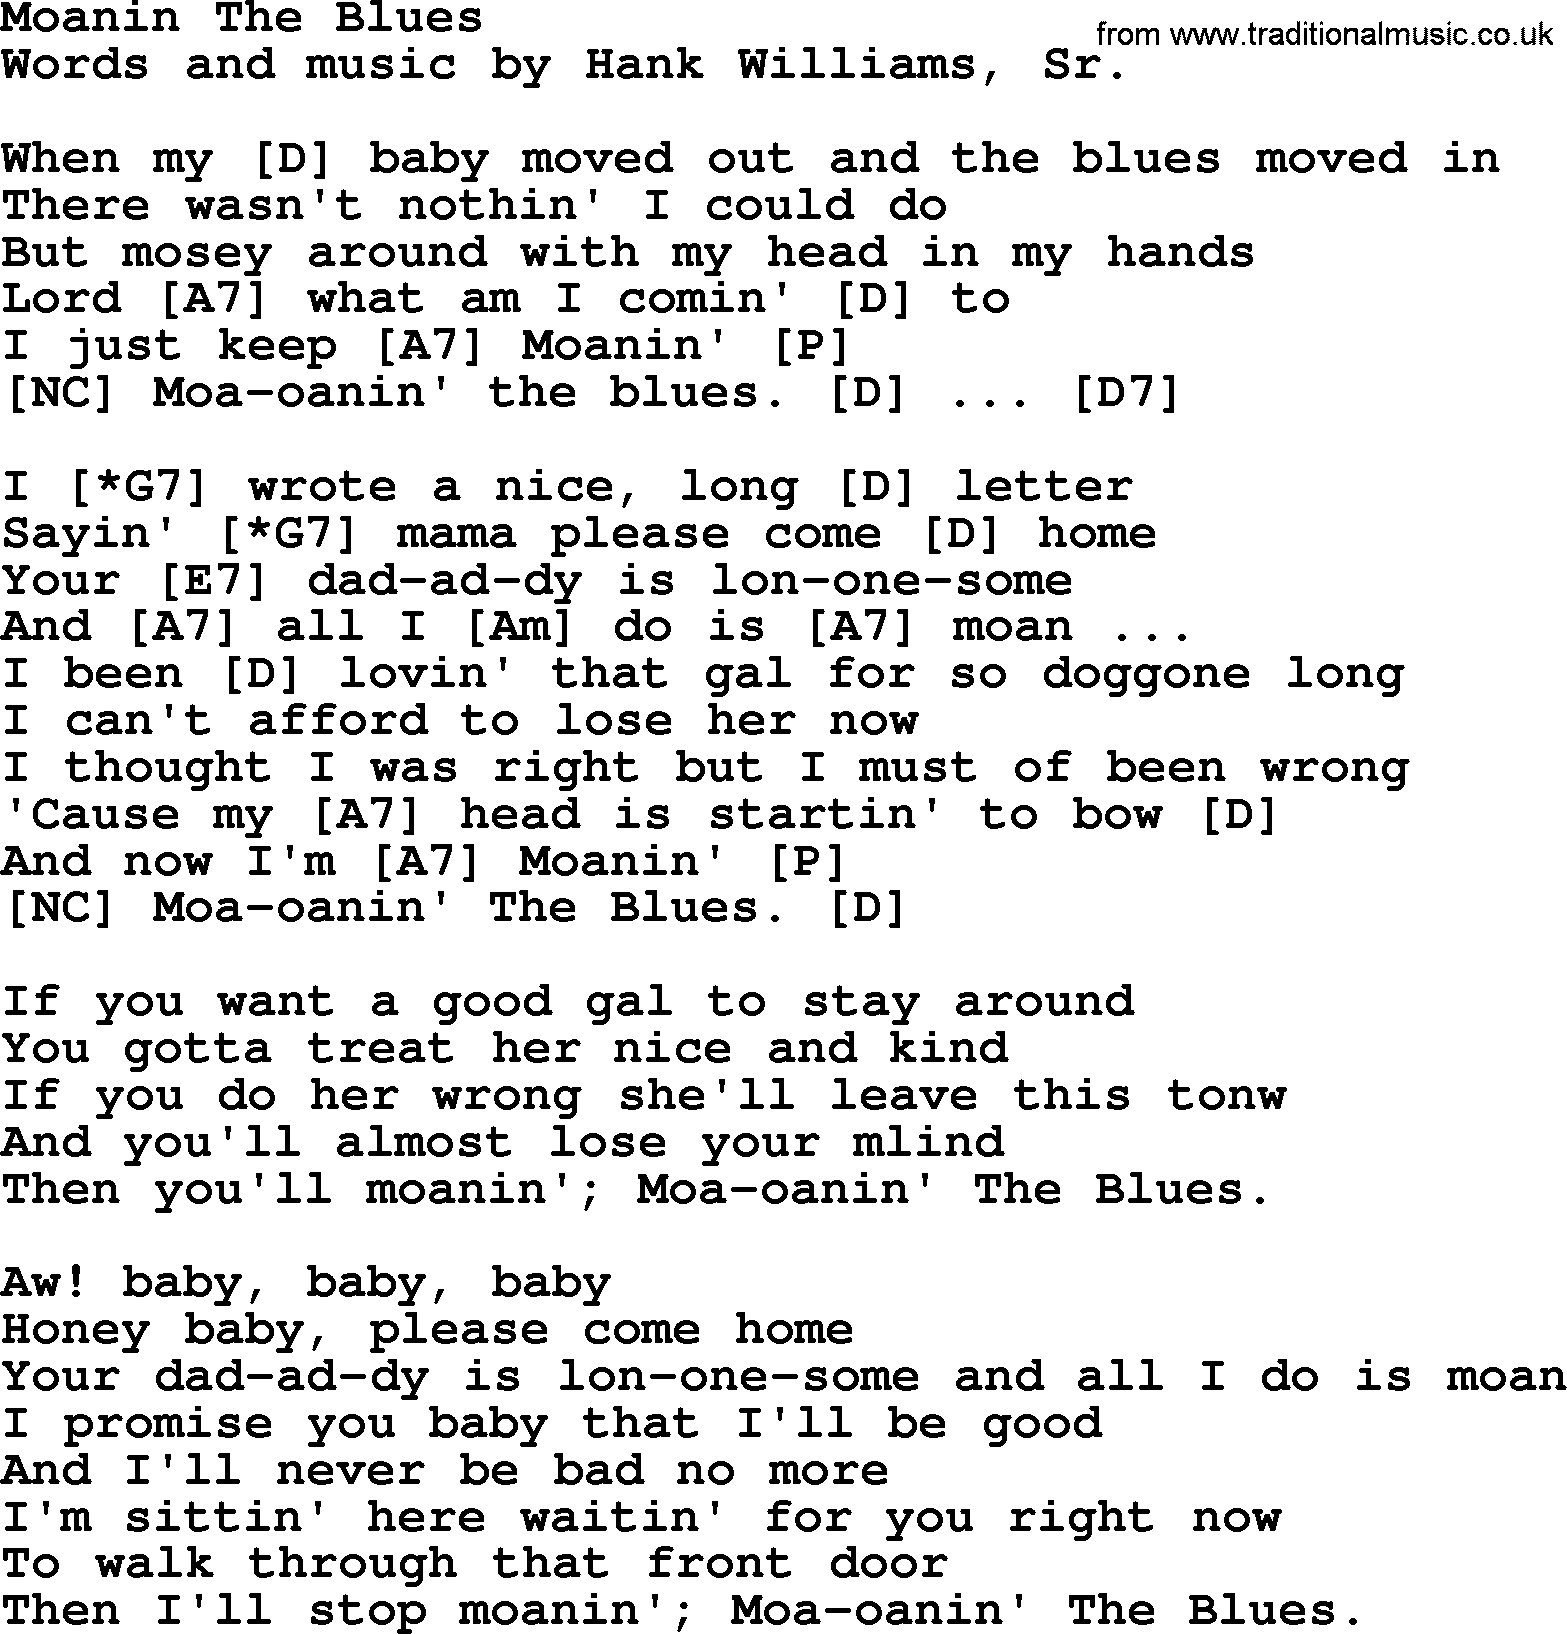 Hank Williams song Moanin The Blues, lyrics and chords